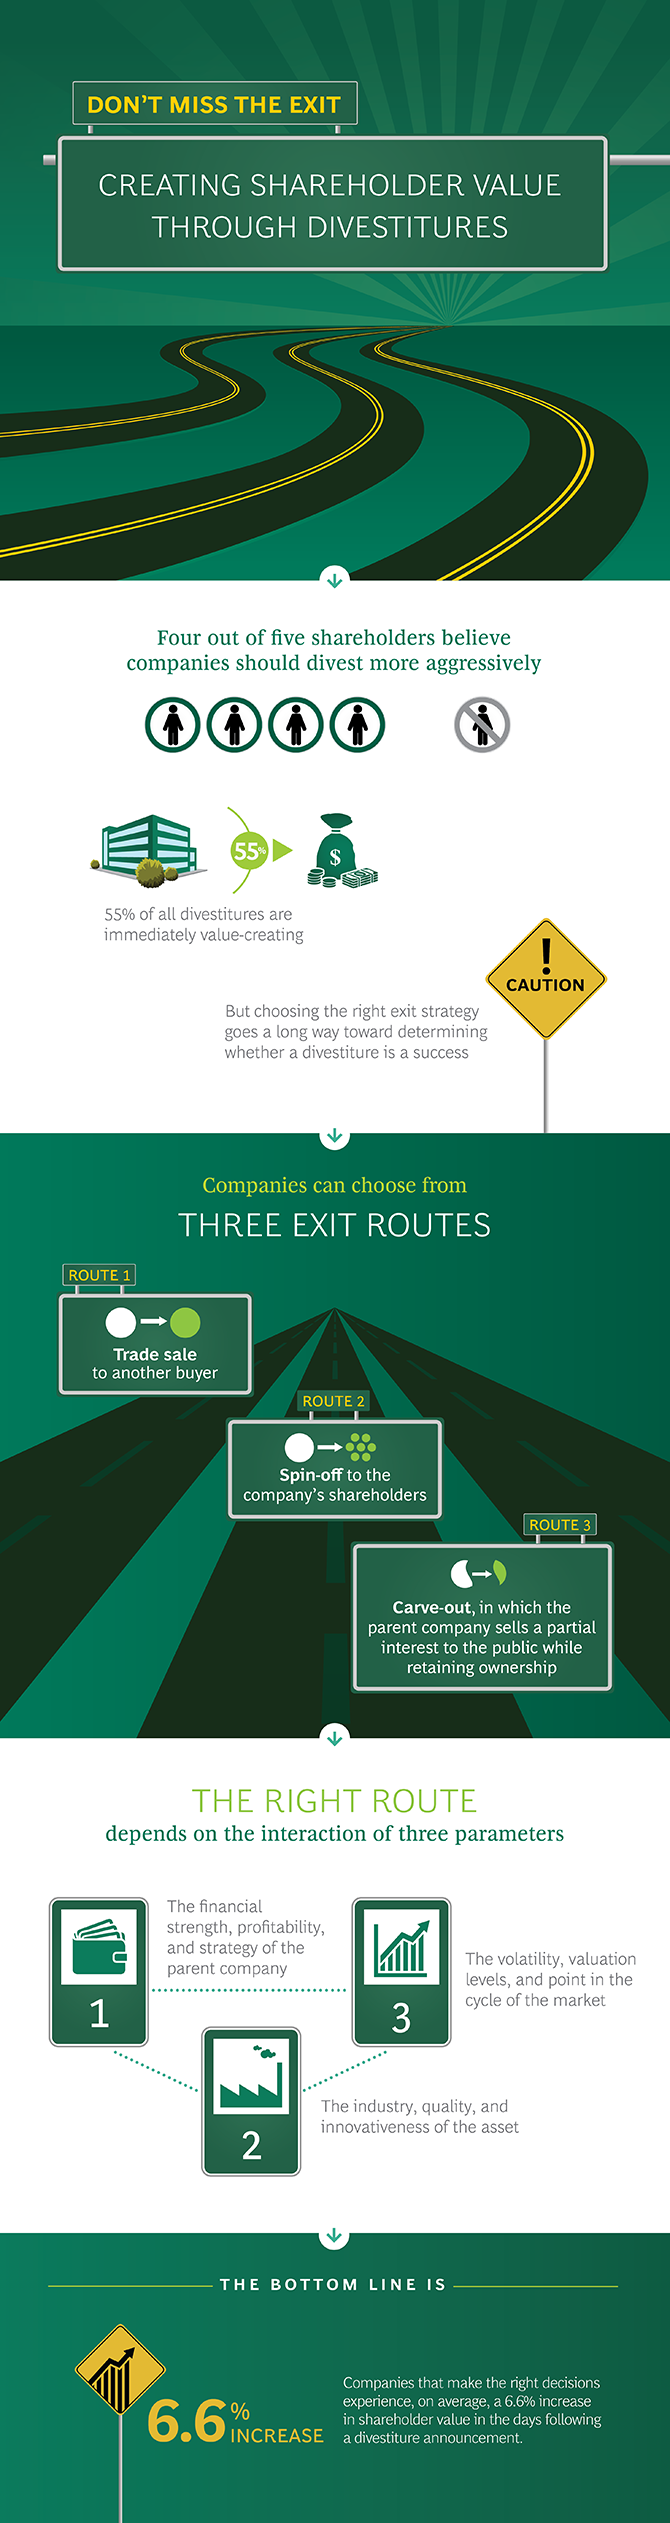 FY360° | Don’t Miss the Exit (infographic)